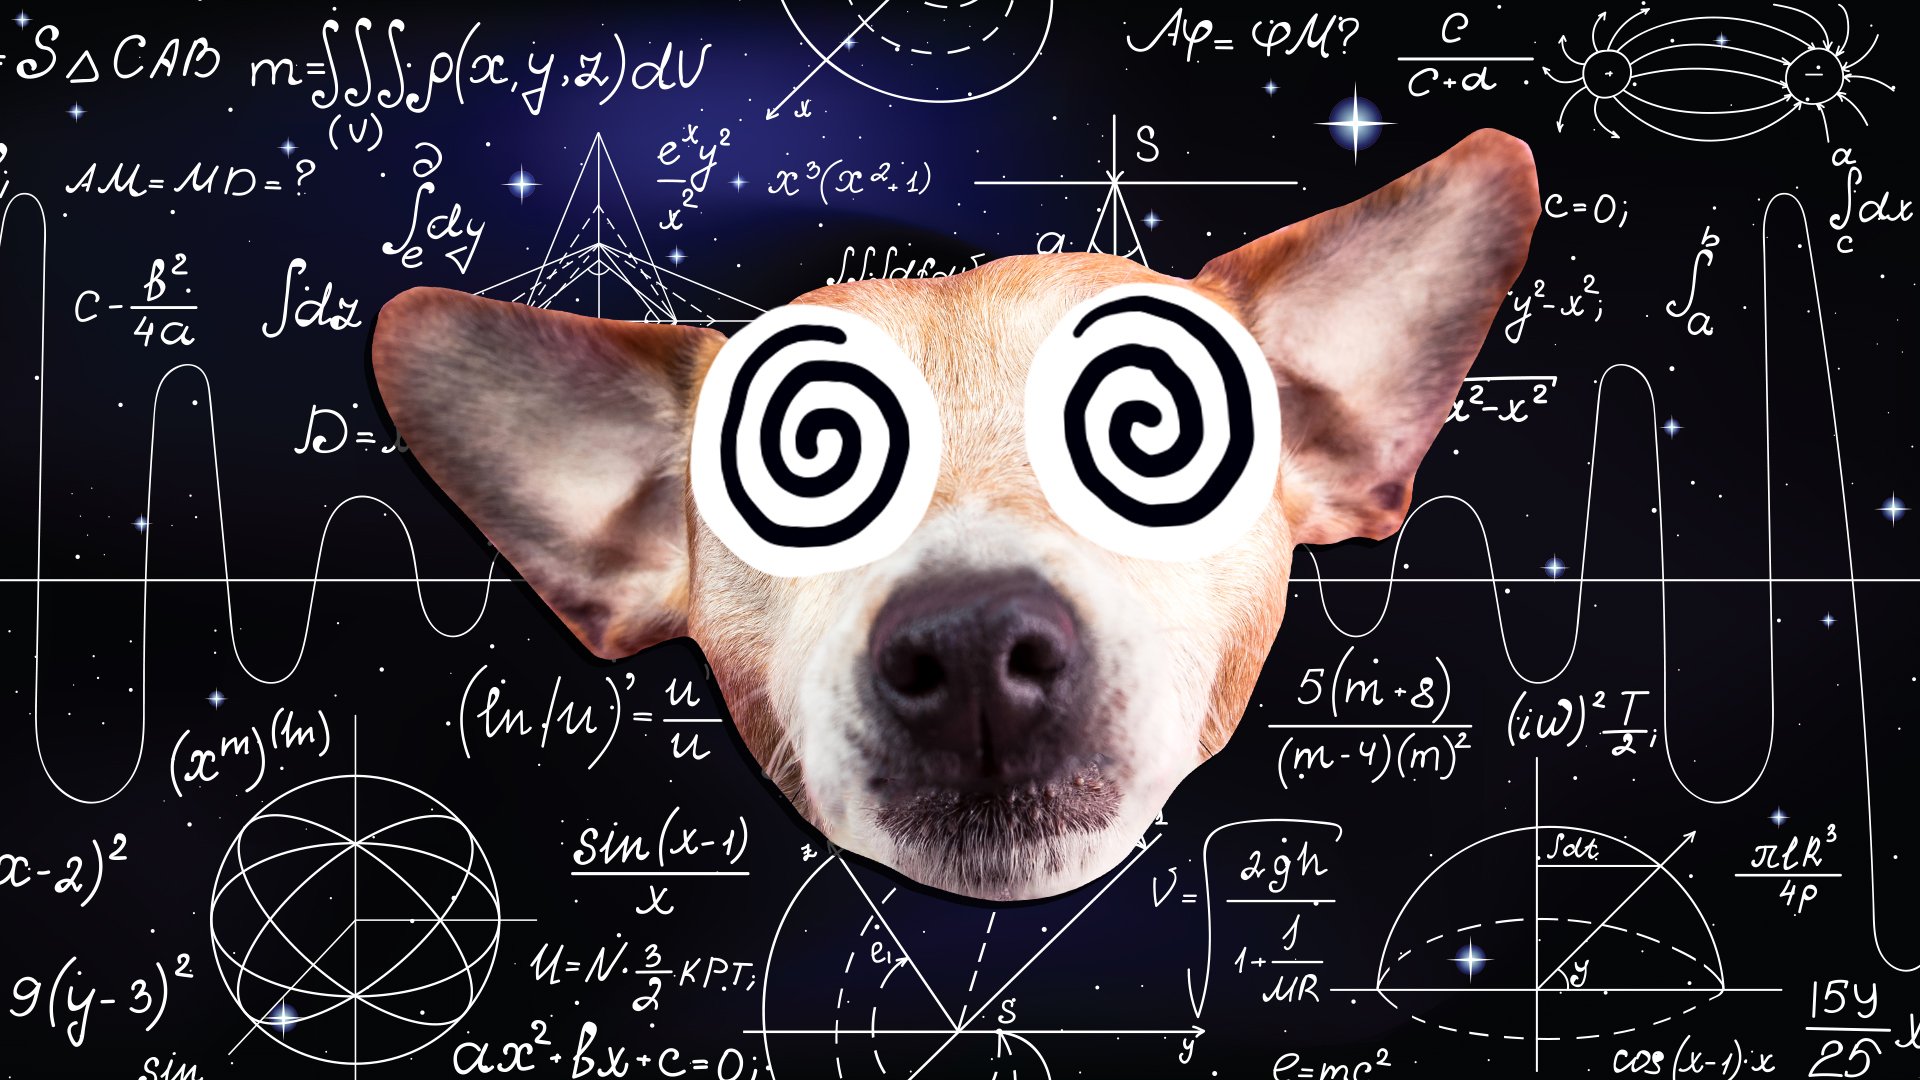 A dog doing maths if you can believe such a thing